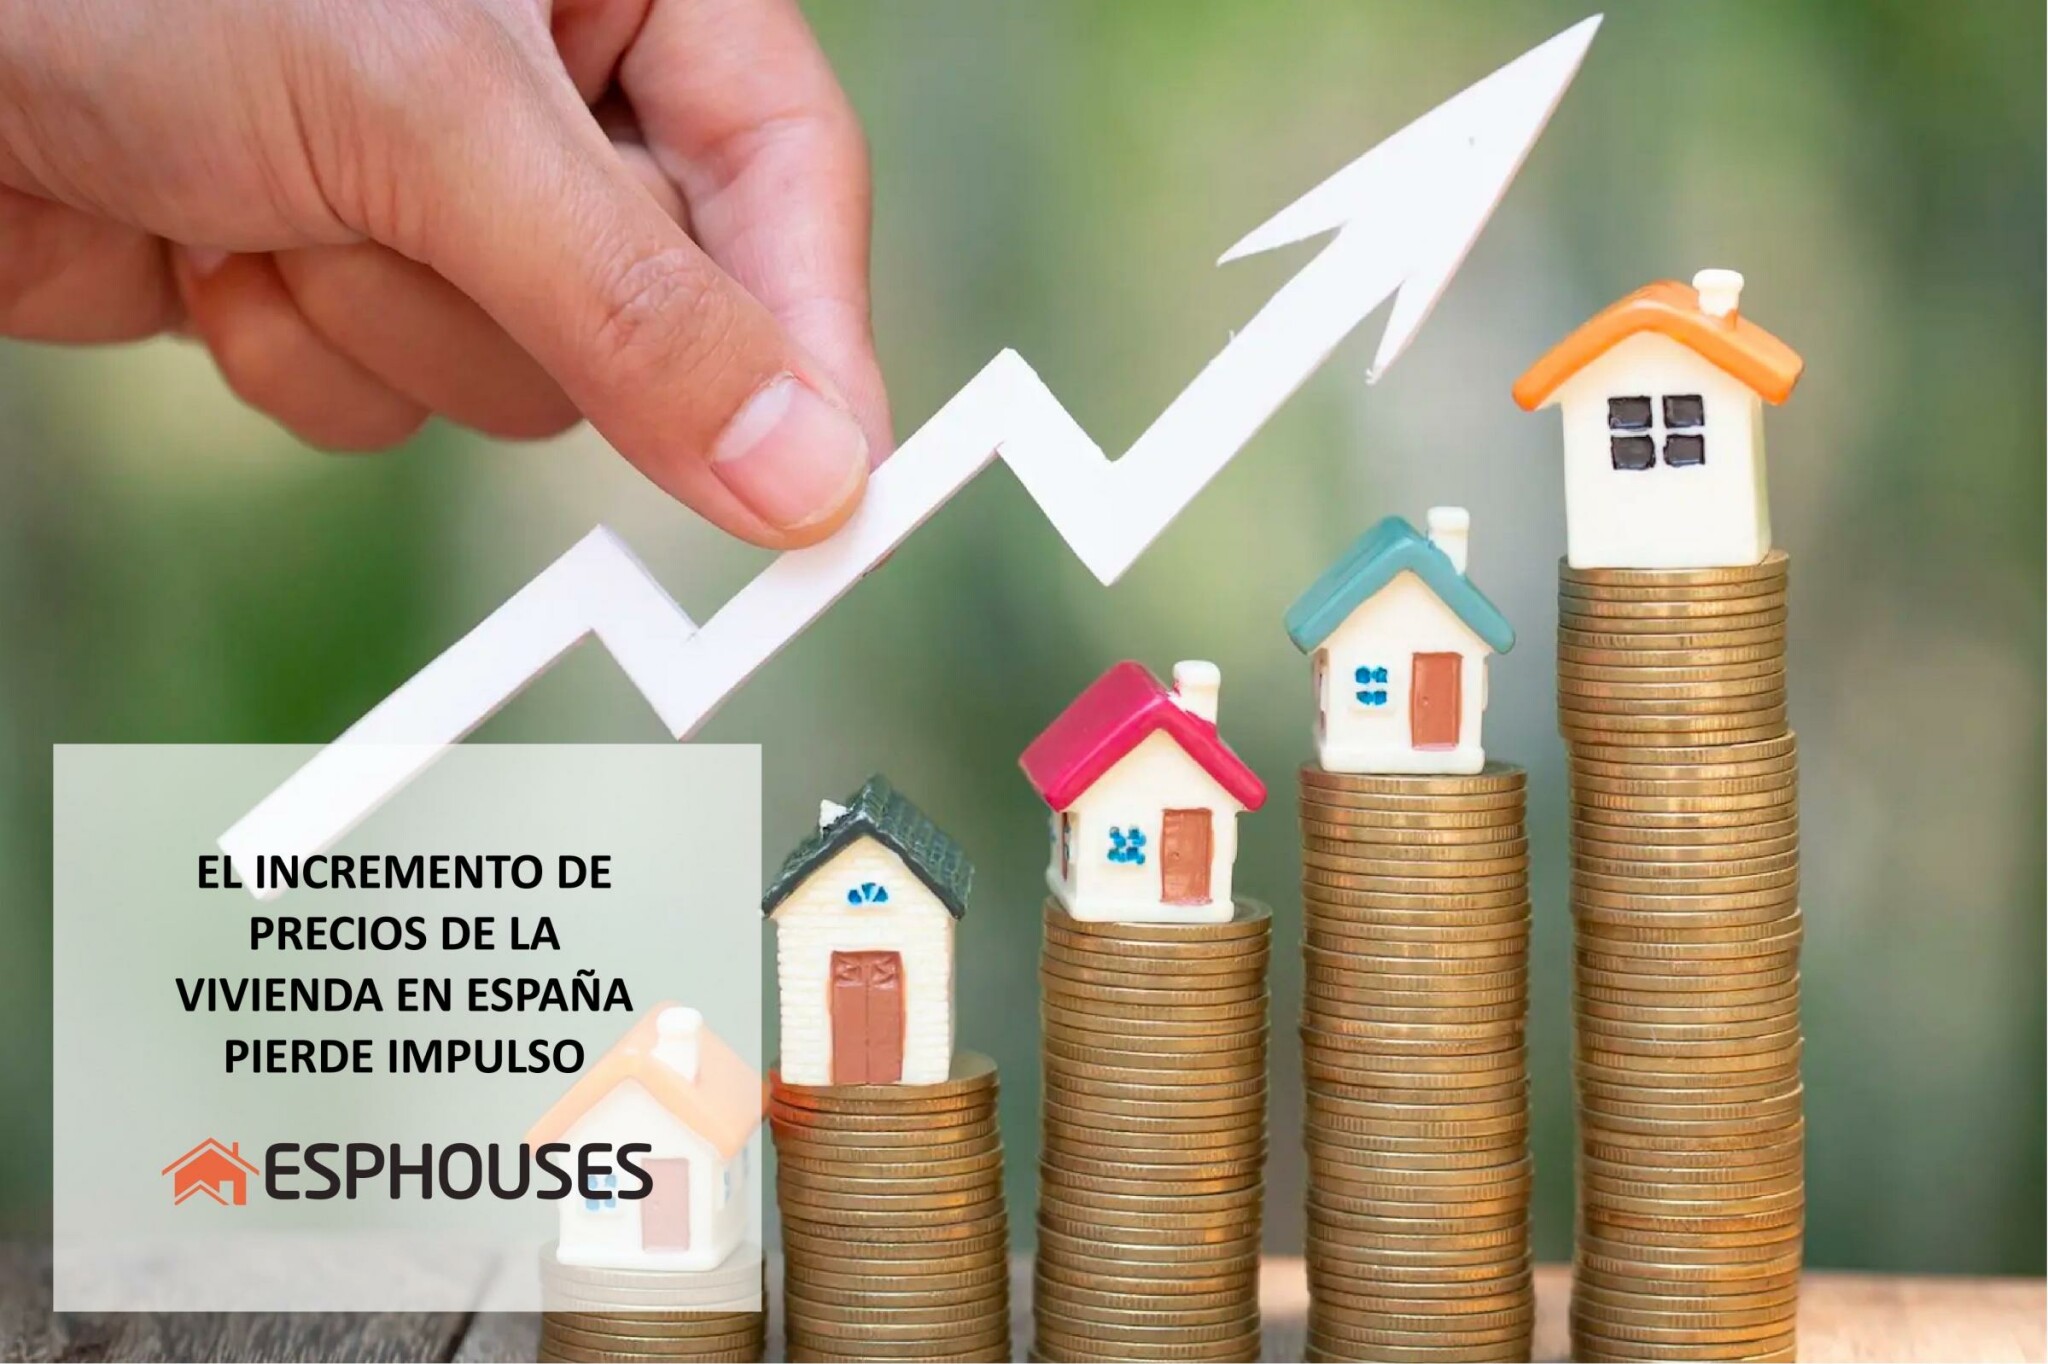 The increase in housing prices in Spain loses momentum